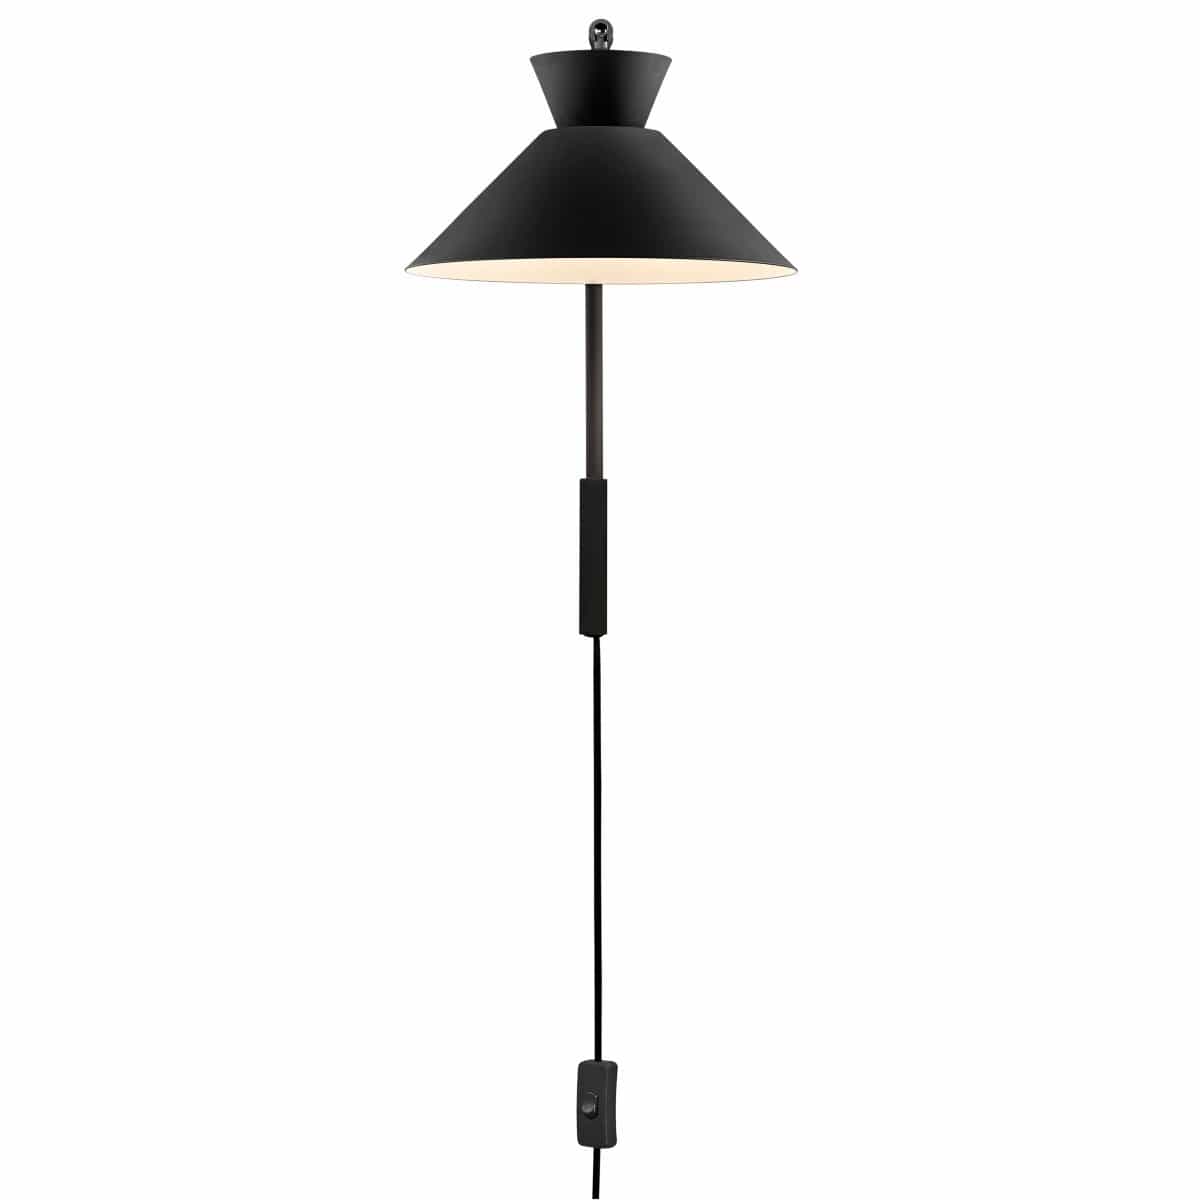 Nordlux Wall Lights Dial Wall Light, grey, black or white